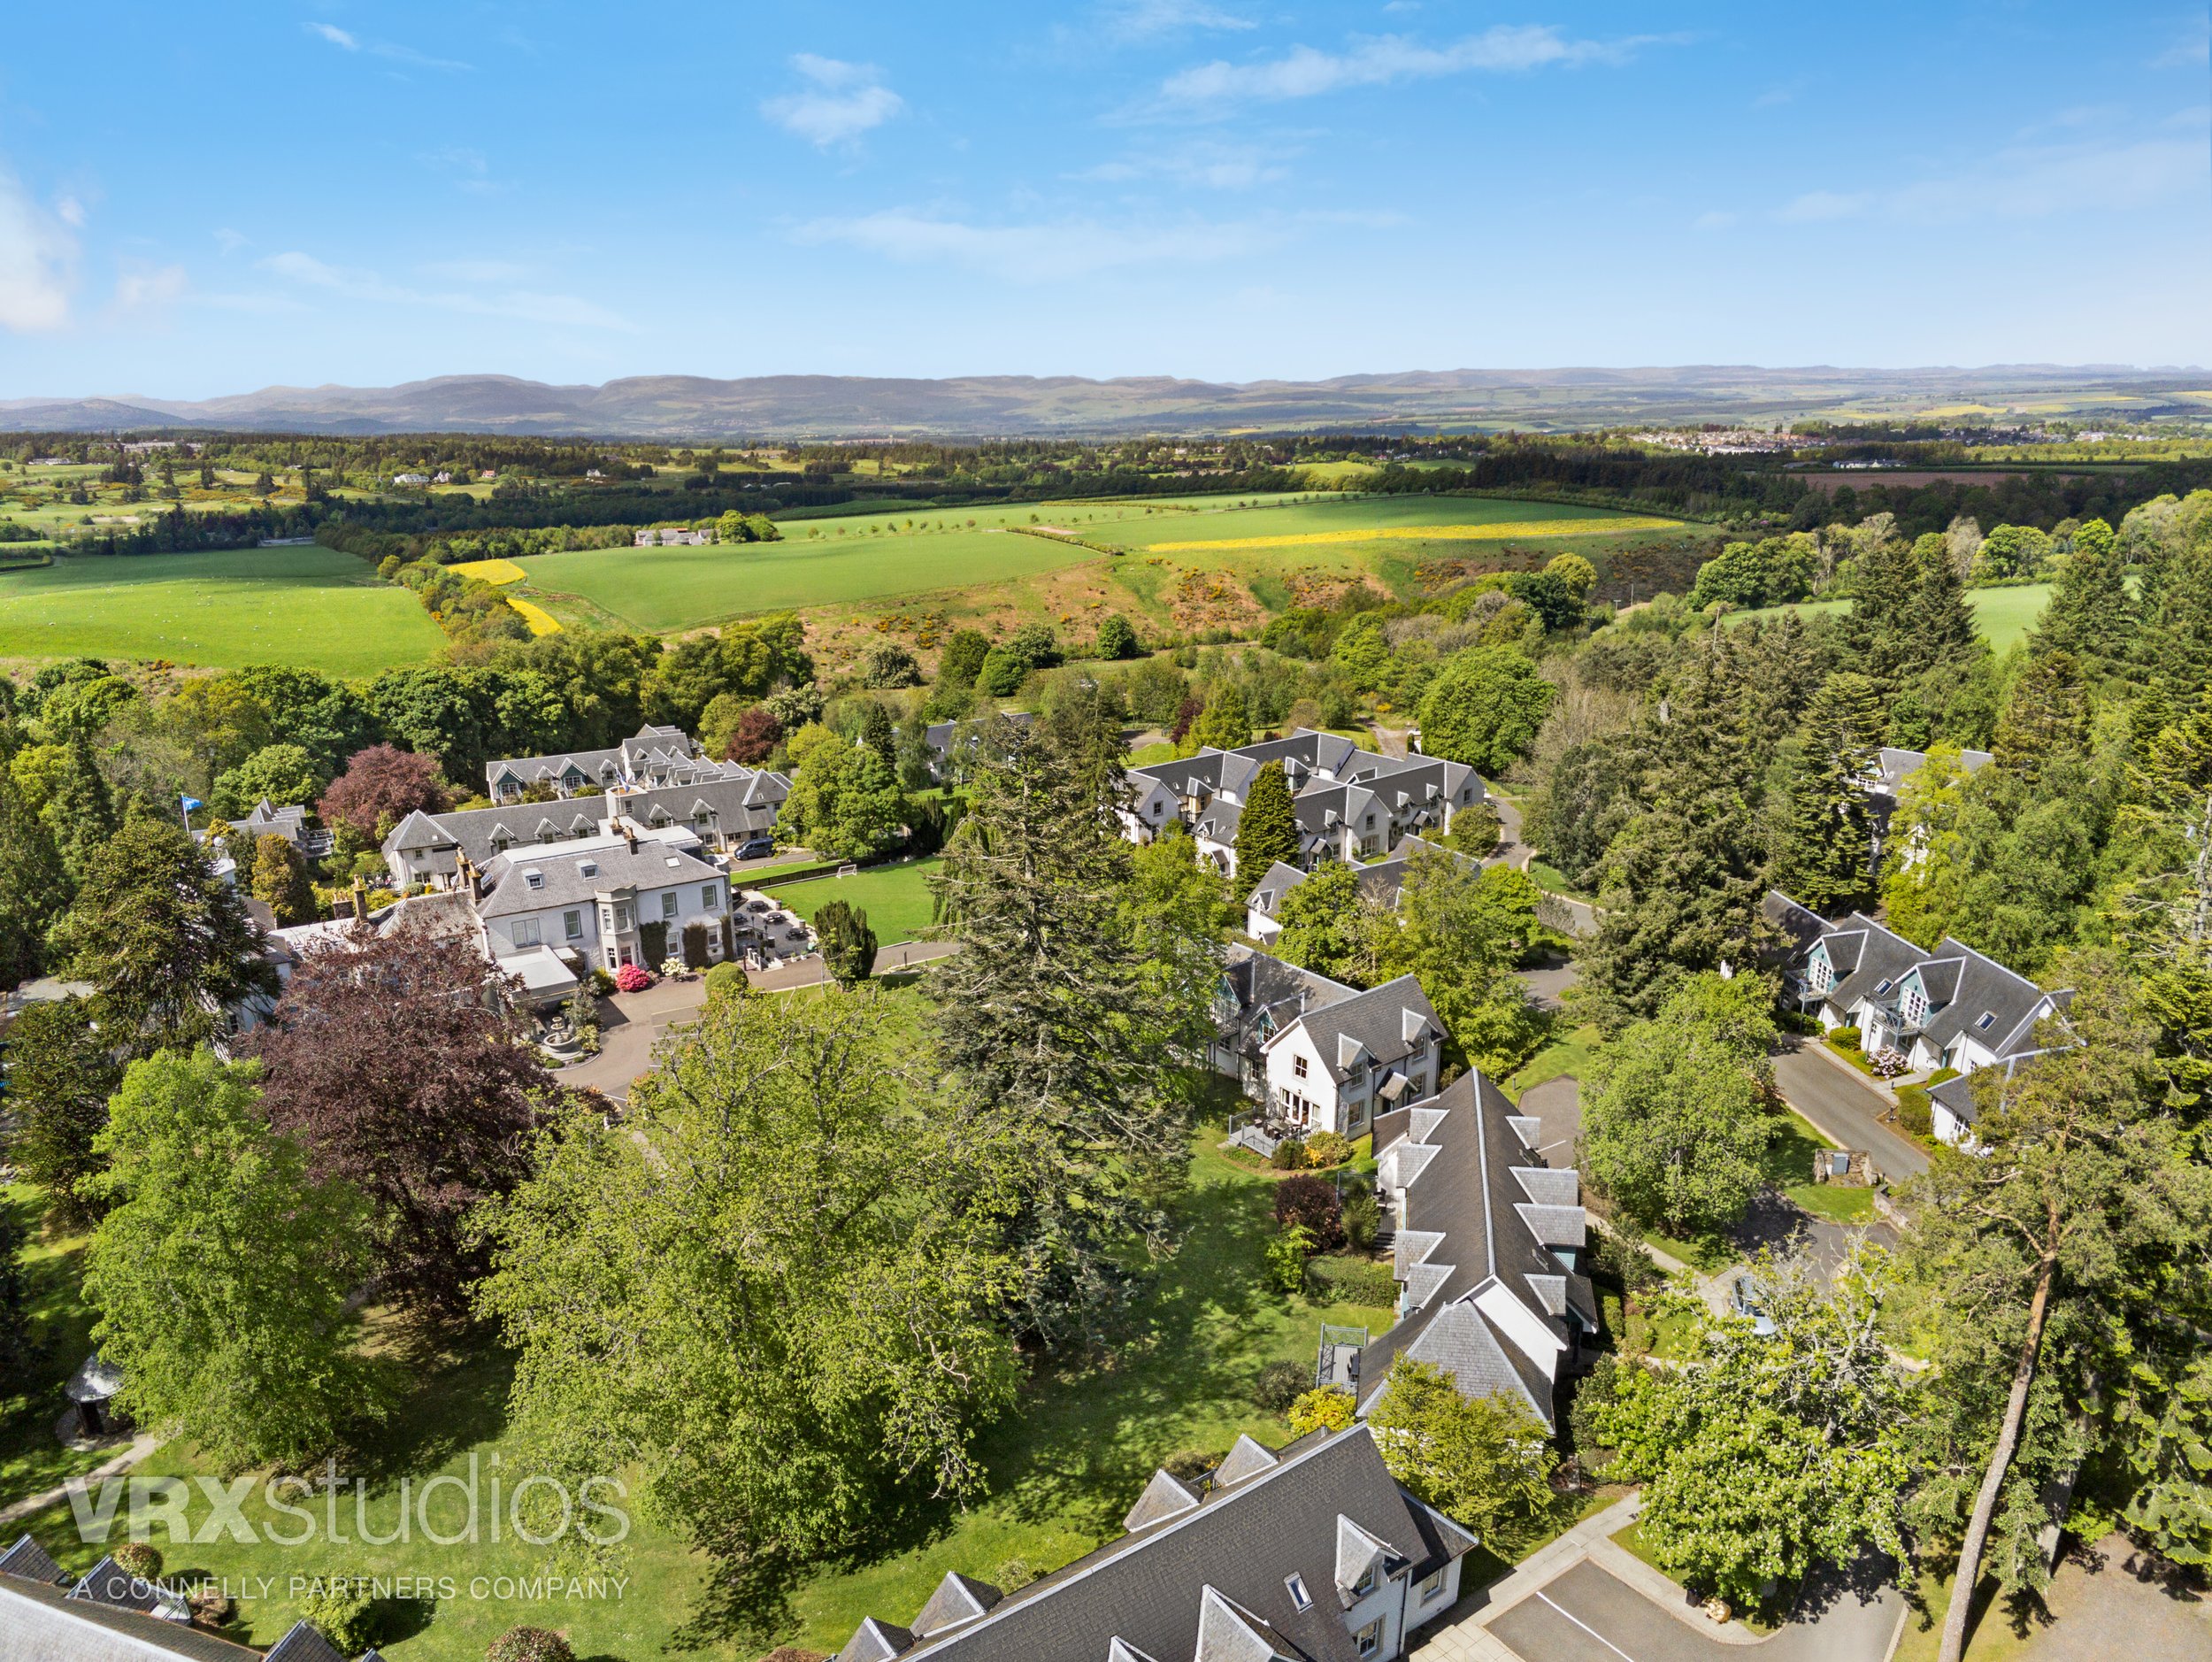  Client: VRX Studios • Project: Wyndham Duchally Country Estate, Scotland • Photographer: Marcelo Barbosa • Produced by: VRX Studios 22/05/2022 